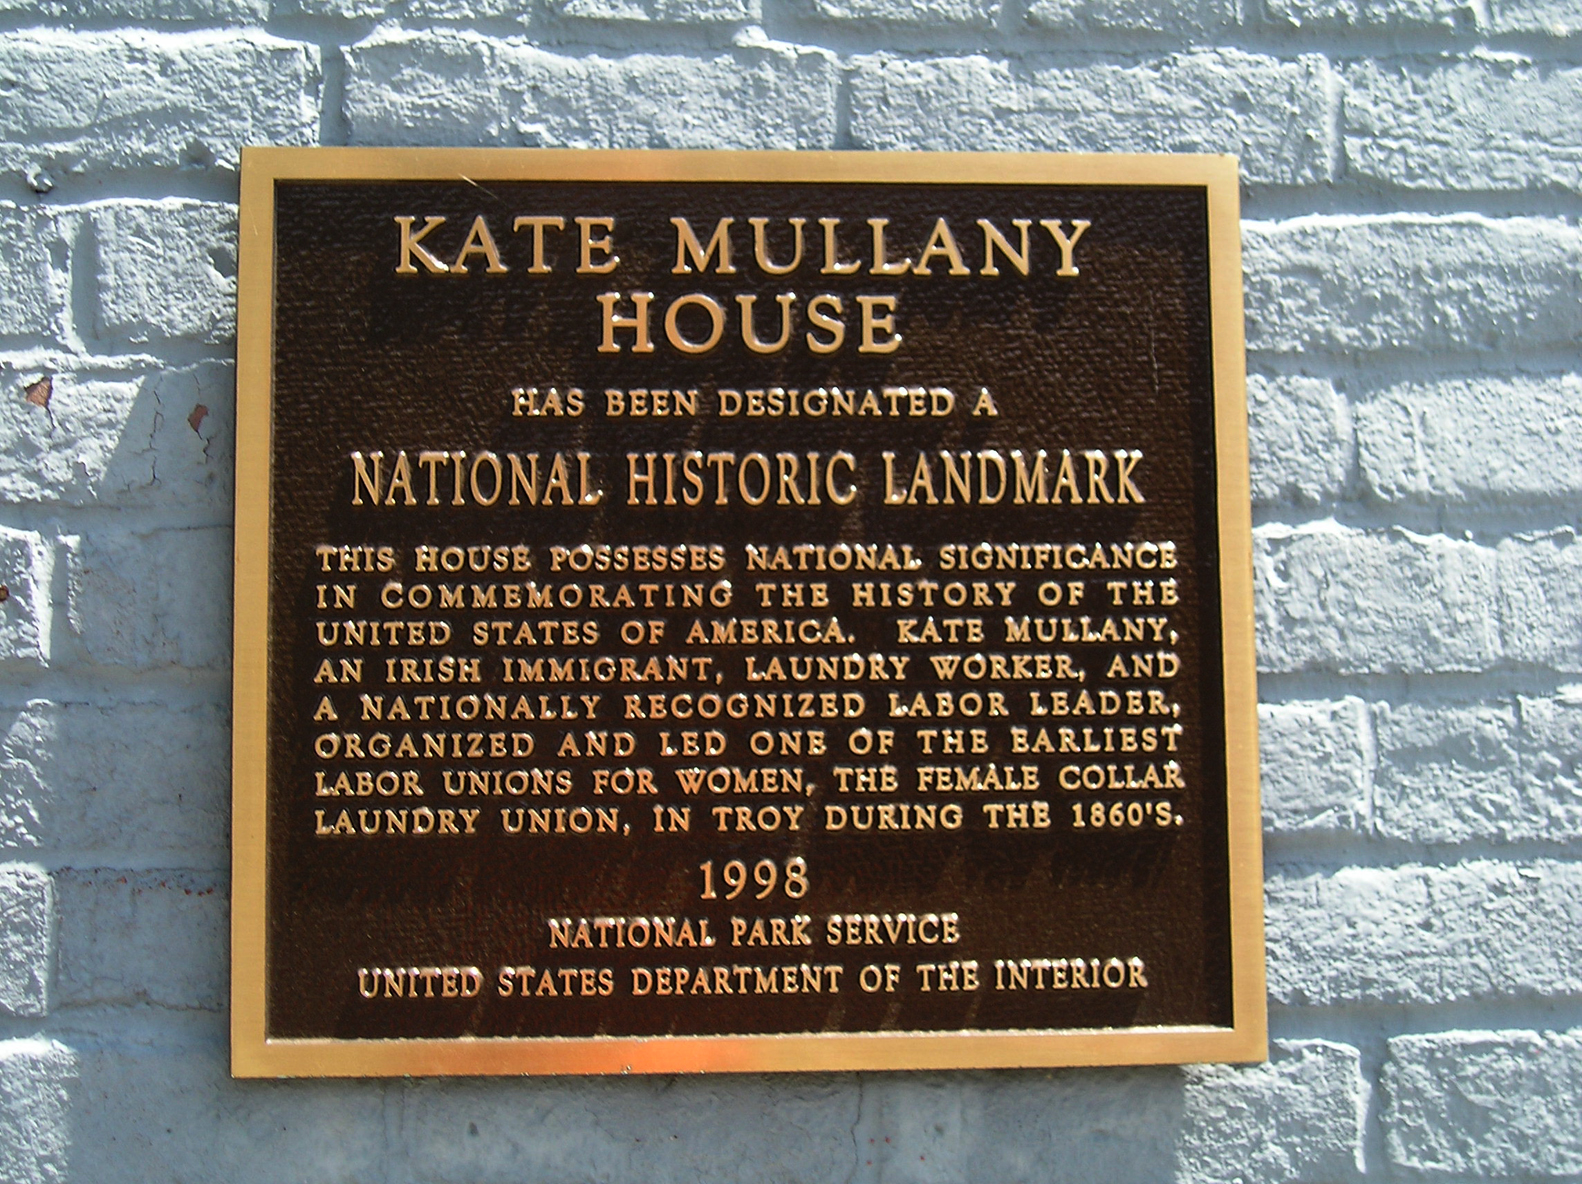 Kate Mullany: A True Labor Pioneer